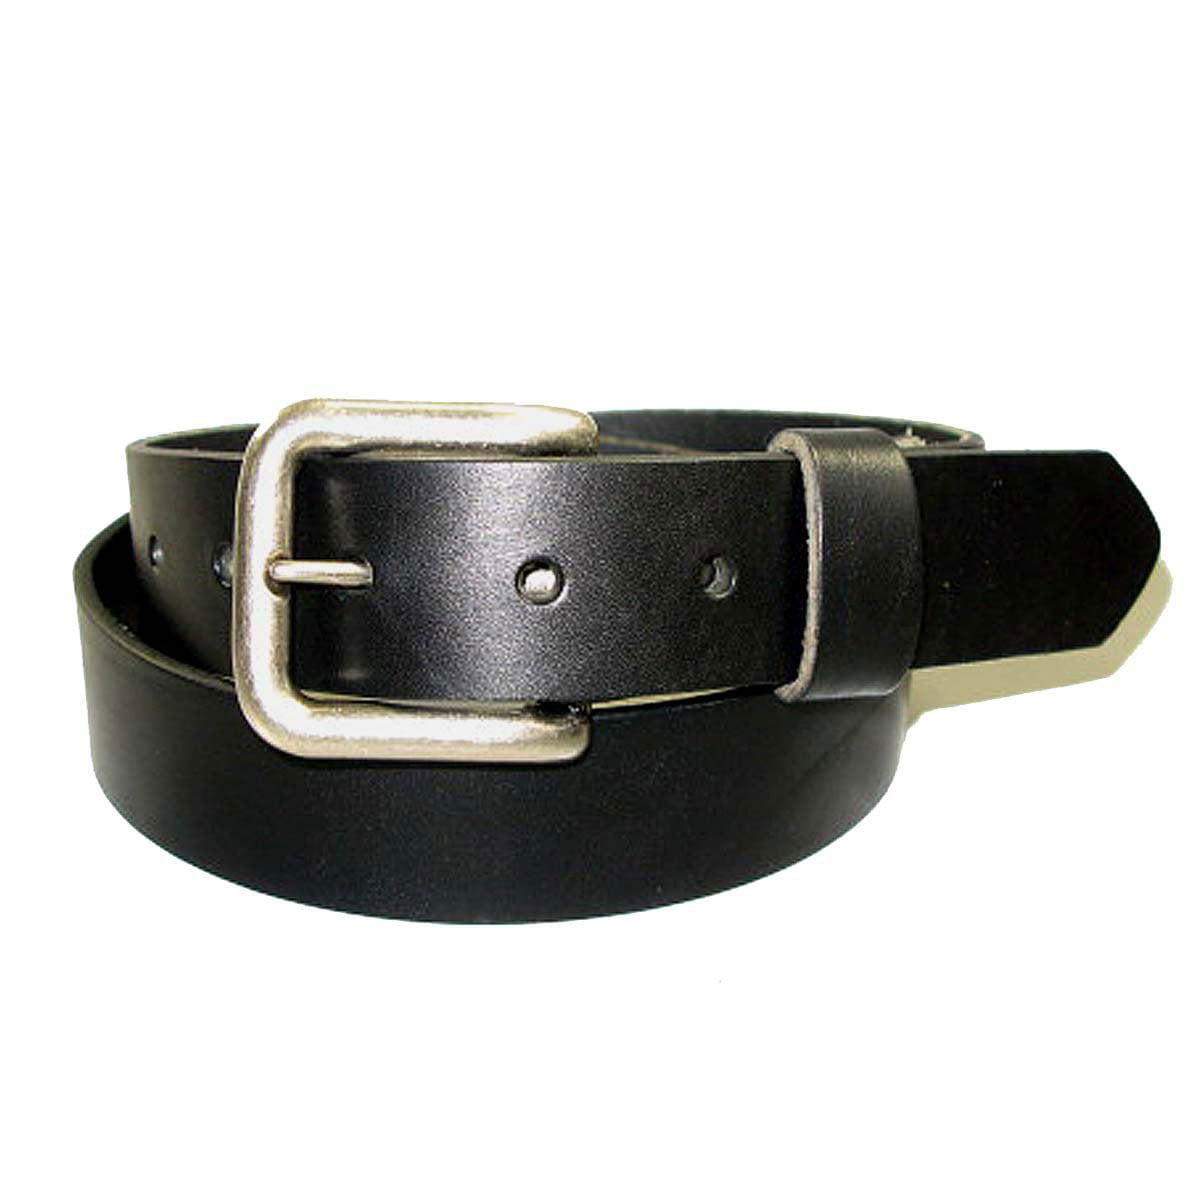 Men's Genuine Black Bridle leather fashion  belt 1 1/8"  made in the USA